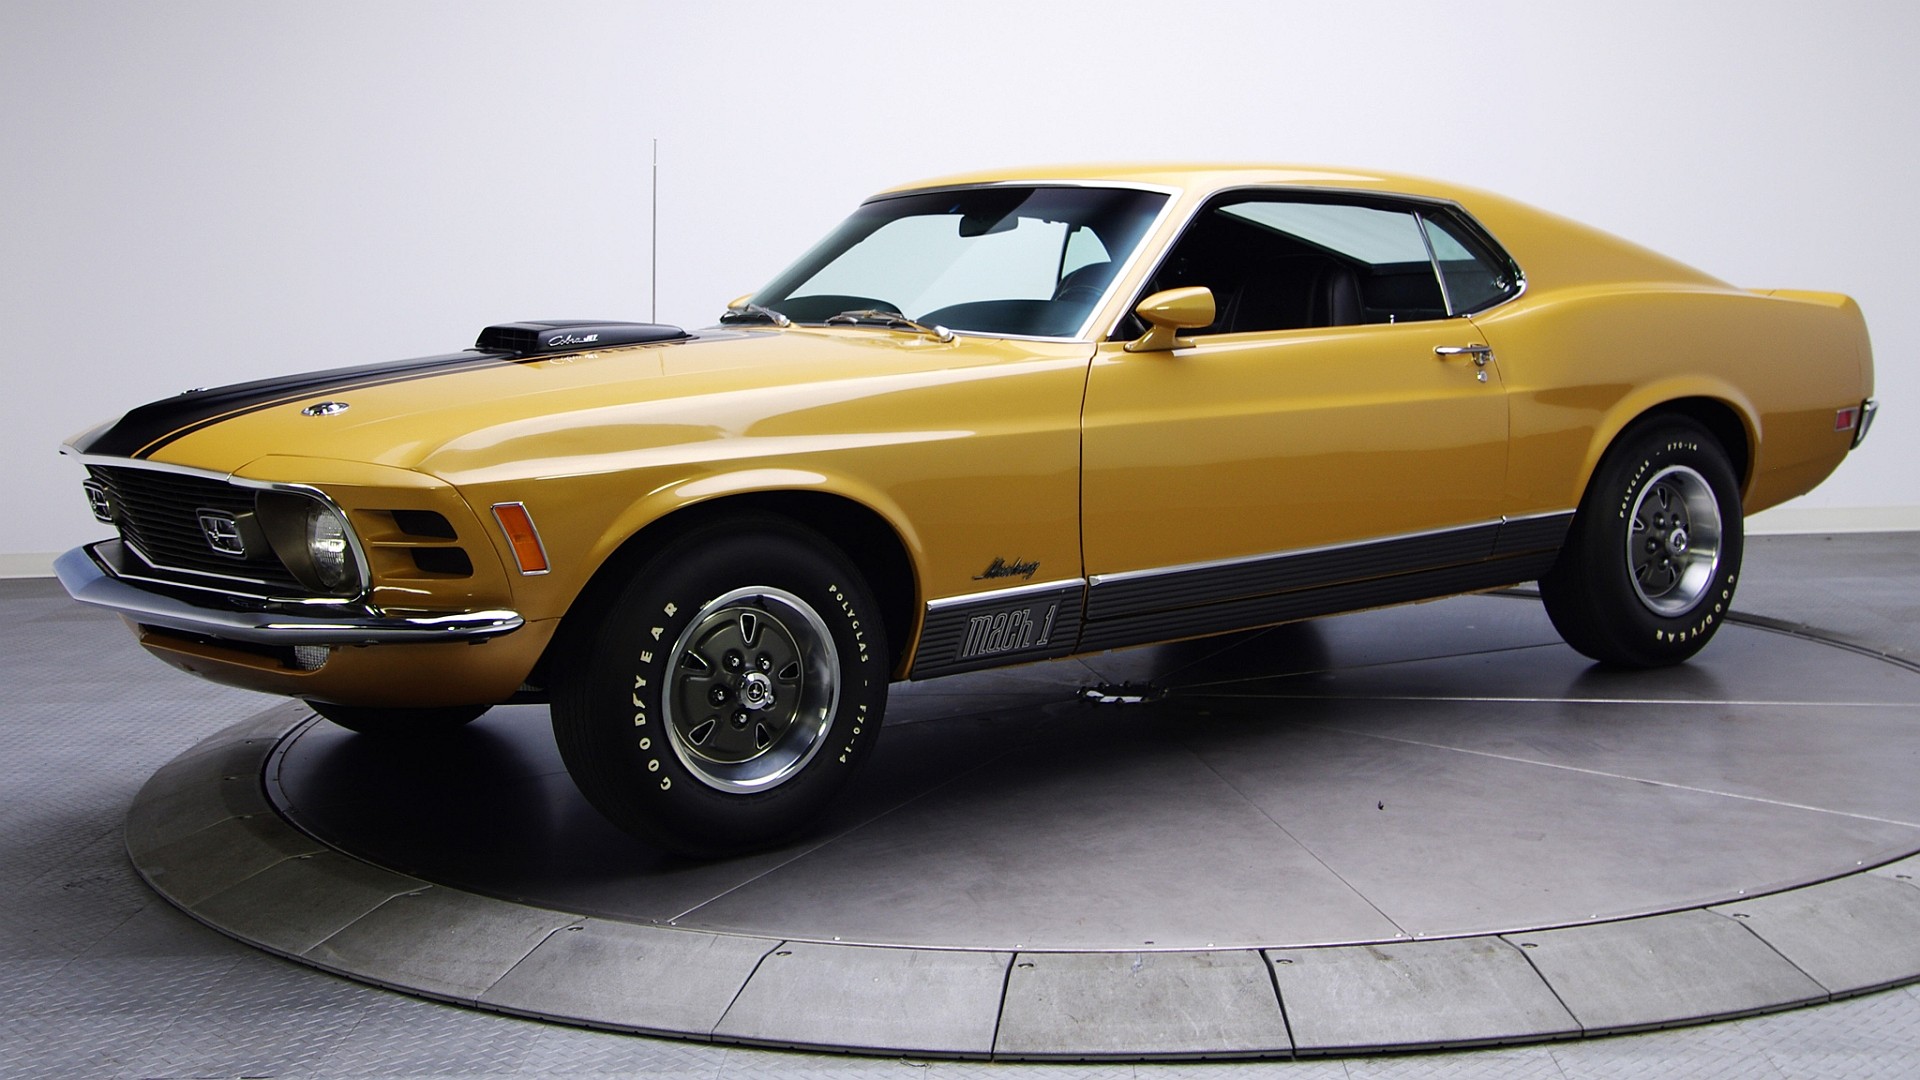 General 1920x1080 car Ford Mustang Ford Mustang Mach 1 Ford vehicle yellow cars muscle cars American cars